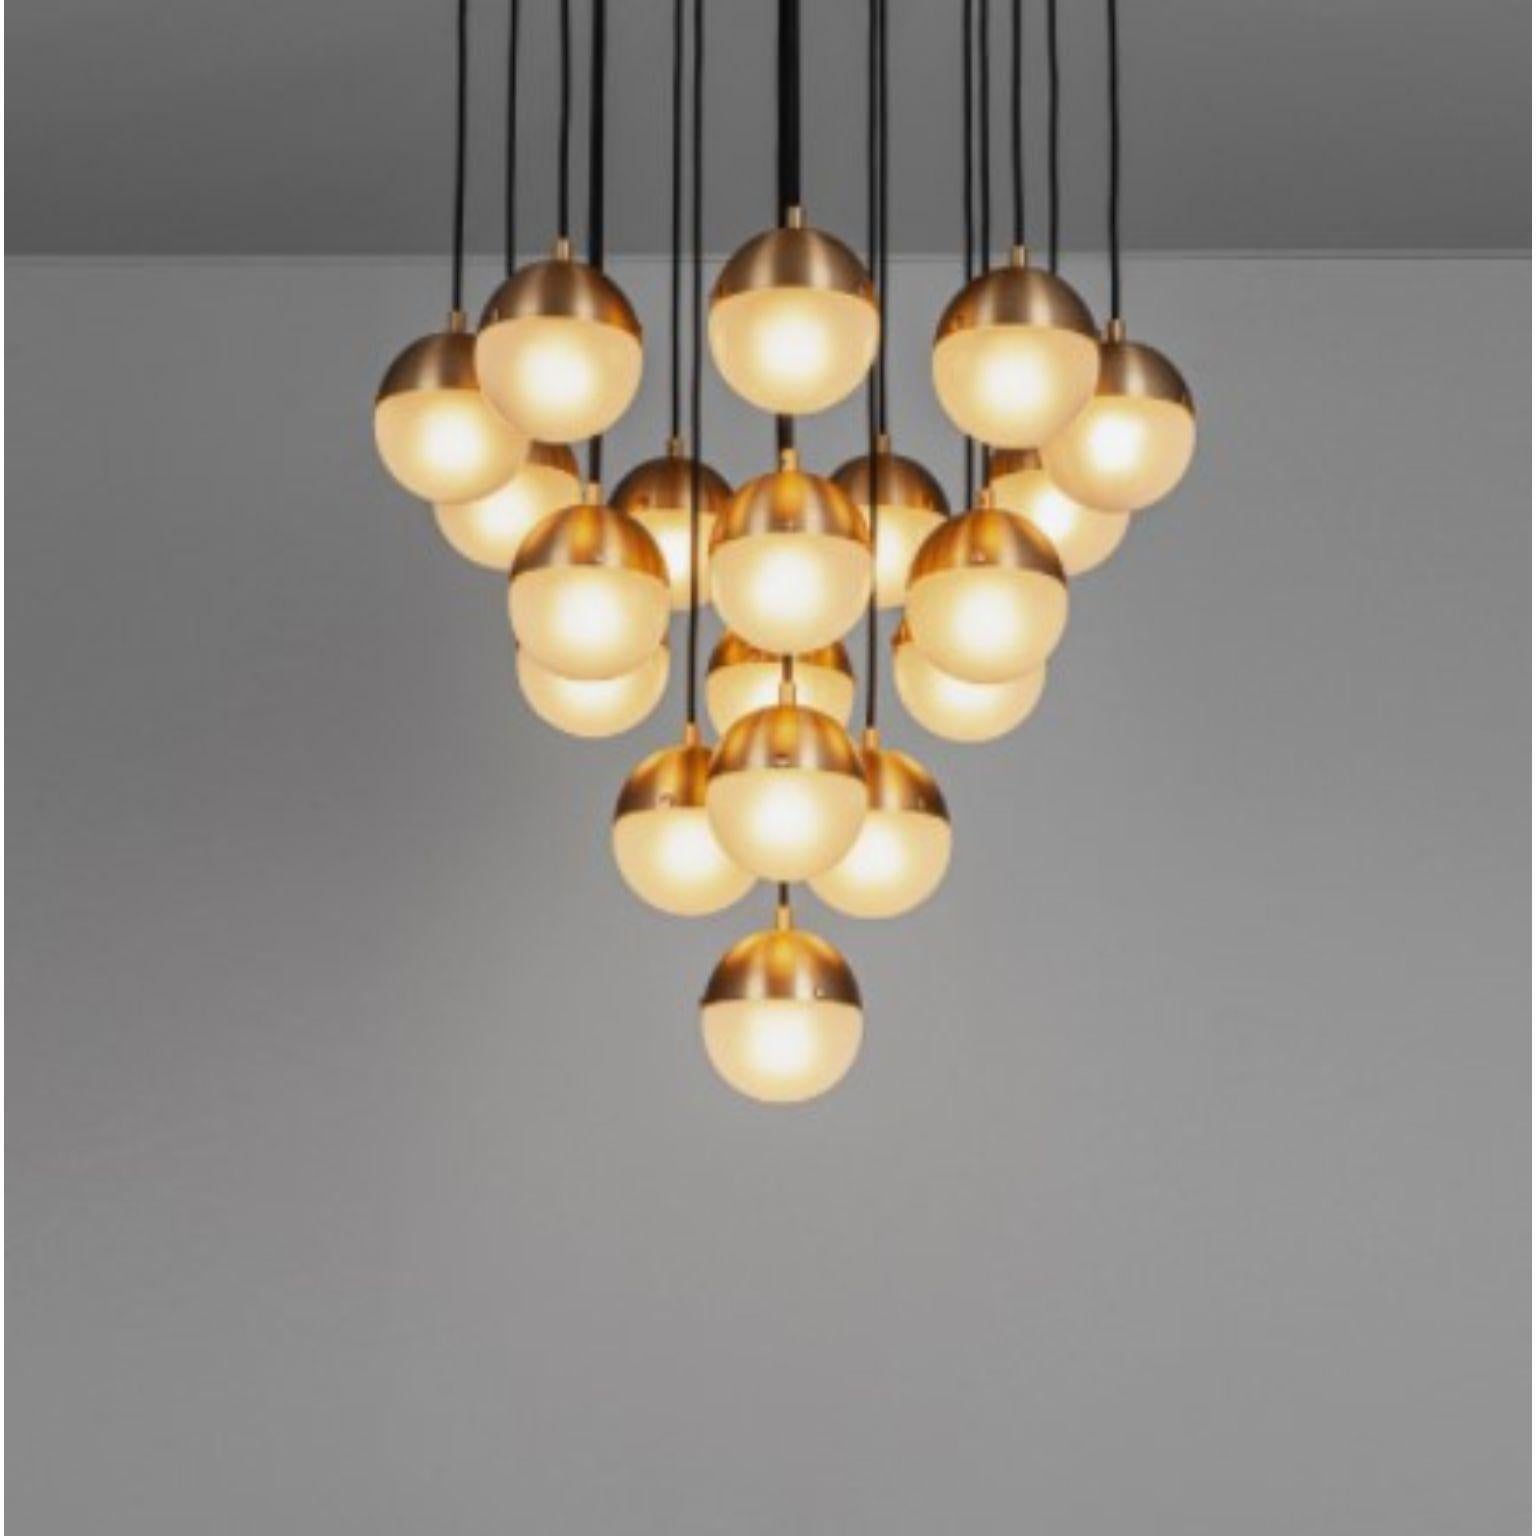 Molecule cluster 19 chandelier by Schwung
Dimensions: D 63 x H 113, 3 cm
Materials: Brass, Opal glass
Weight: 20.9 kg

Finishes available: Black gunmetal, polished nickel, brass
Other sizes available.

Schwung is a german word, and loosely